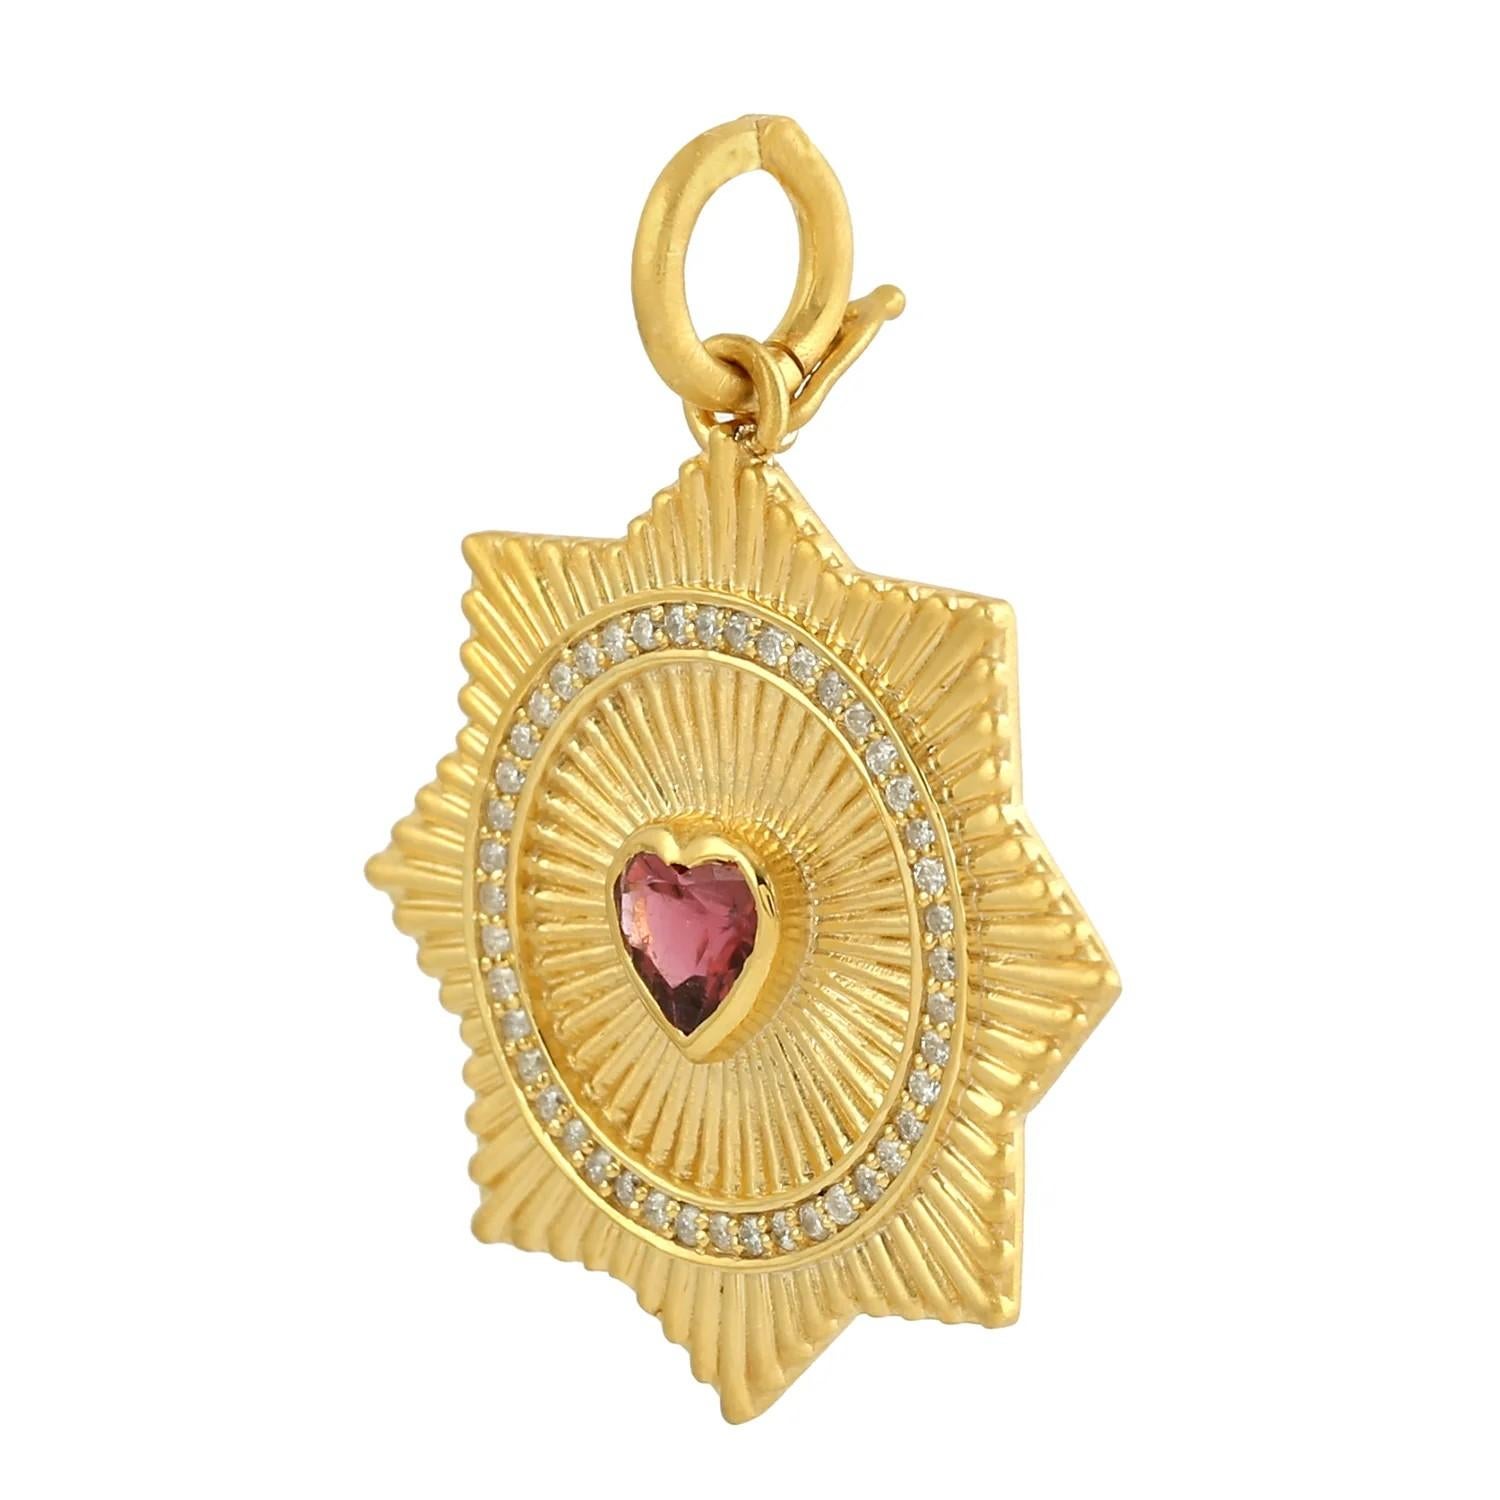 This medallion charm has been meticulously crafted from 14-karat gold and set in mixed gemstones & .24 carats of sparkling diamonds. 

FOLLOW  MEGHNA JEWELS storefront to view the latest collection & exclusive pieces.  Meghna Jewels is proudly rated